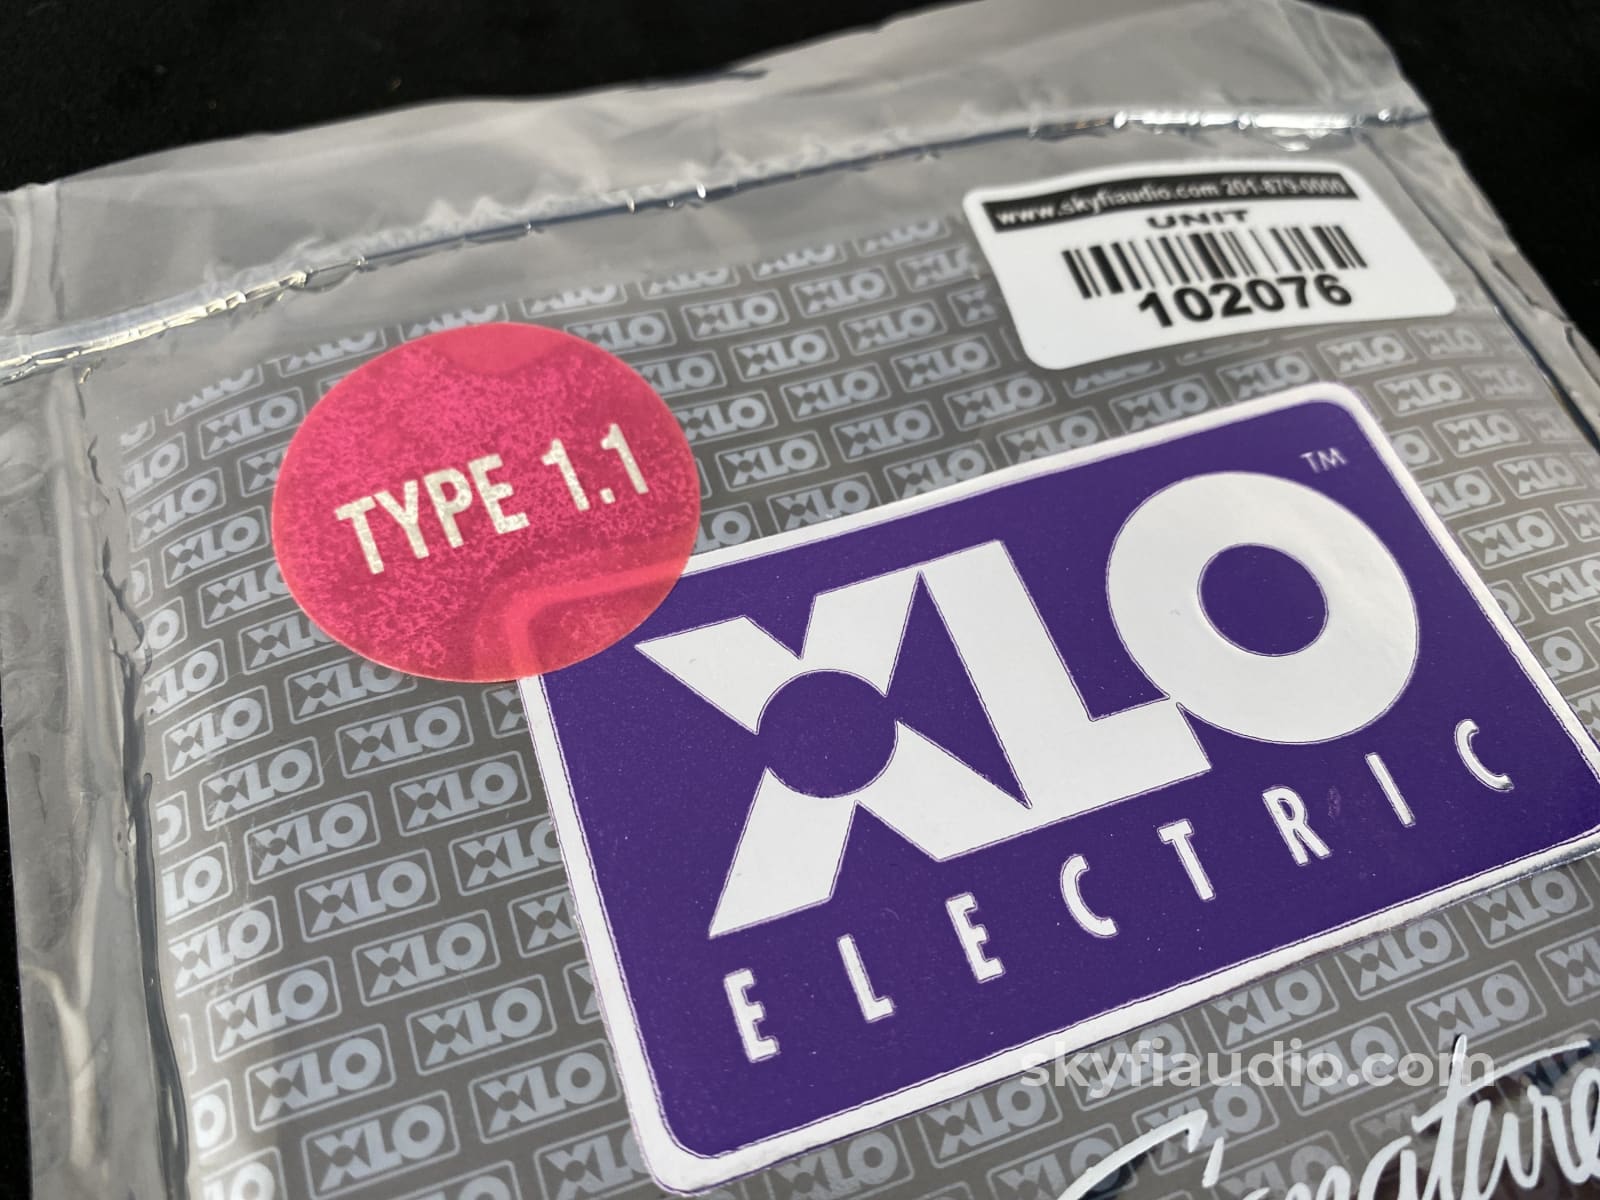 Xlo Signature Series Type 1.1 Rca Interconnect - Like New In Original Packaging 1M Cables